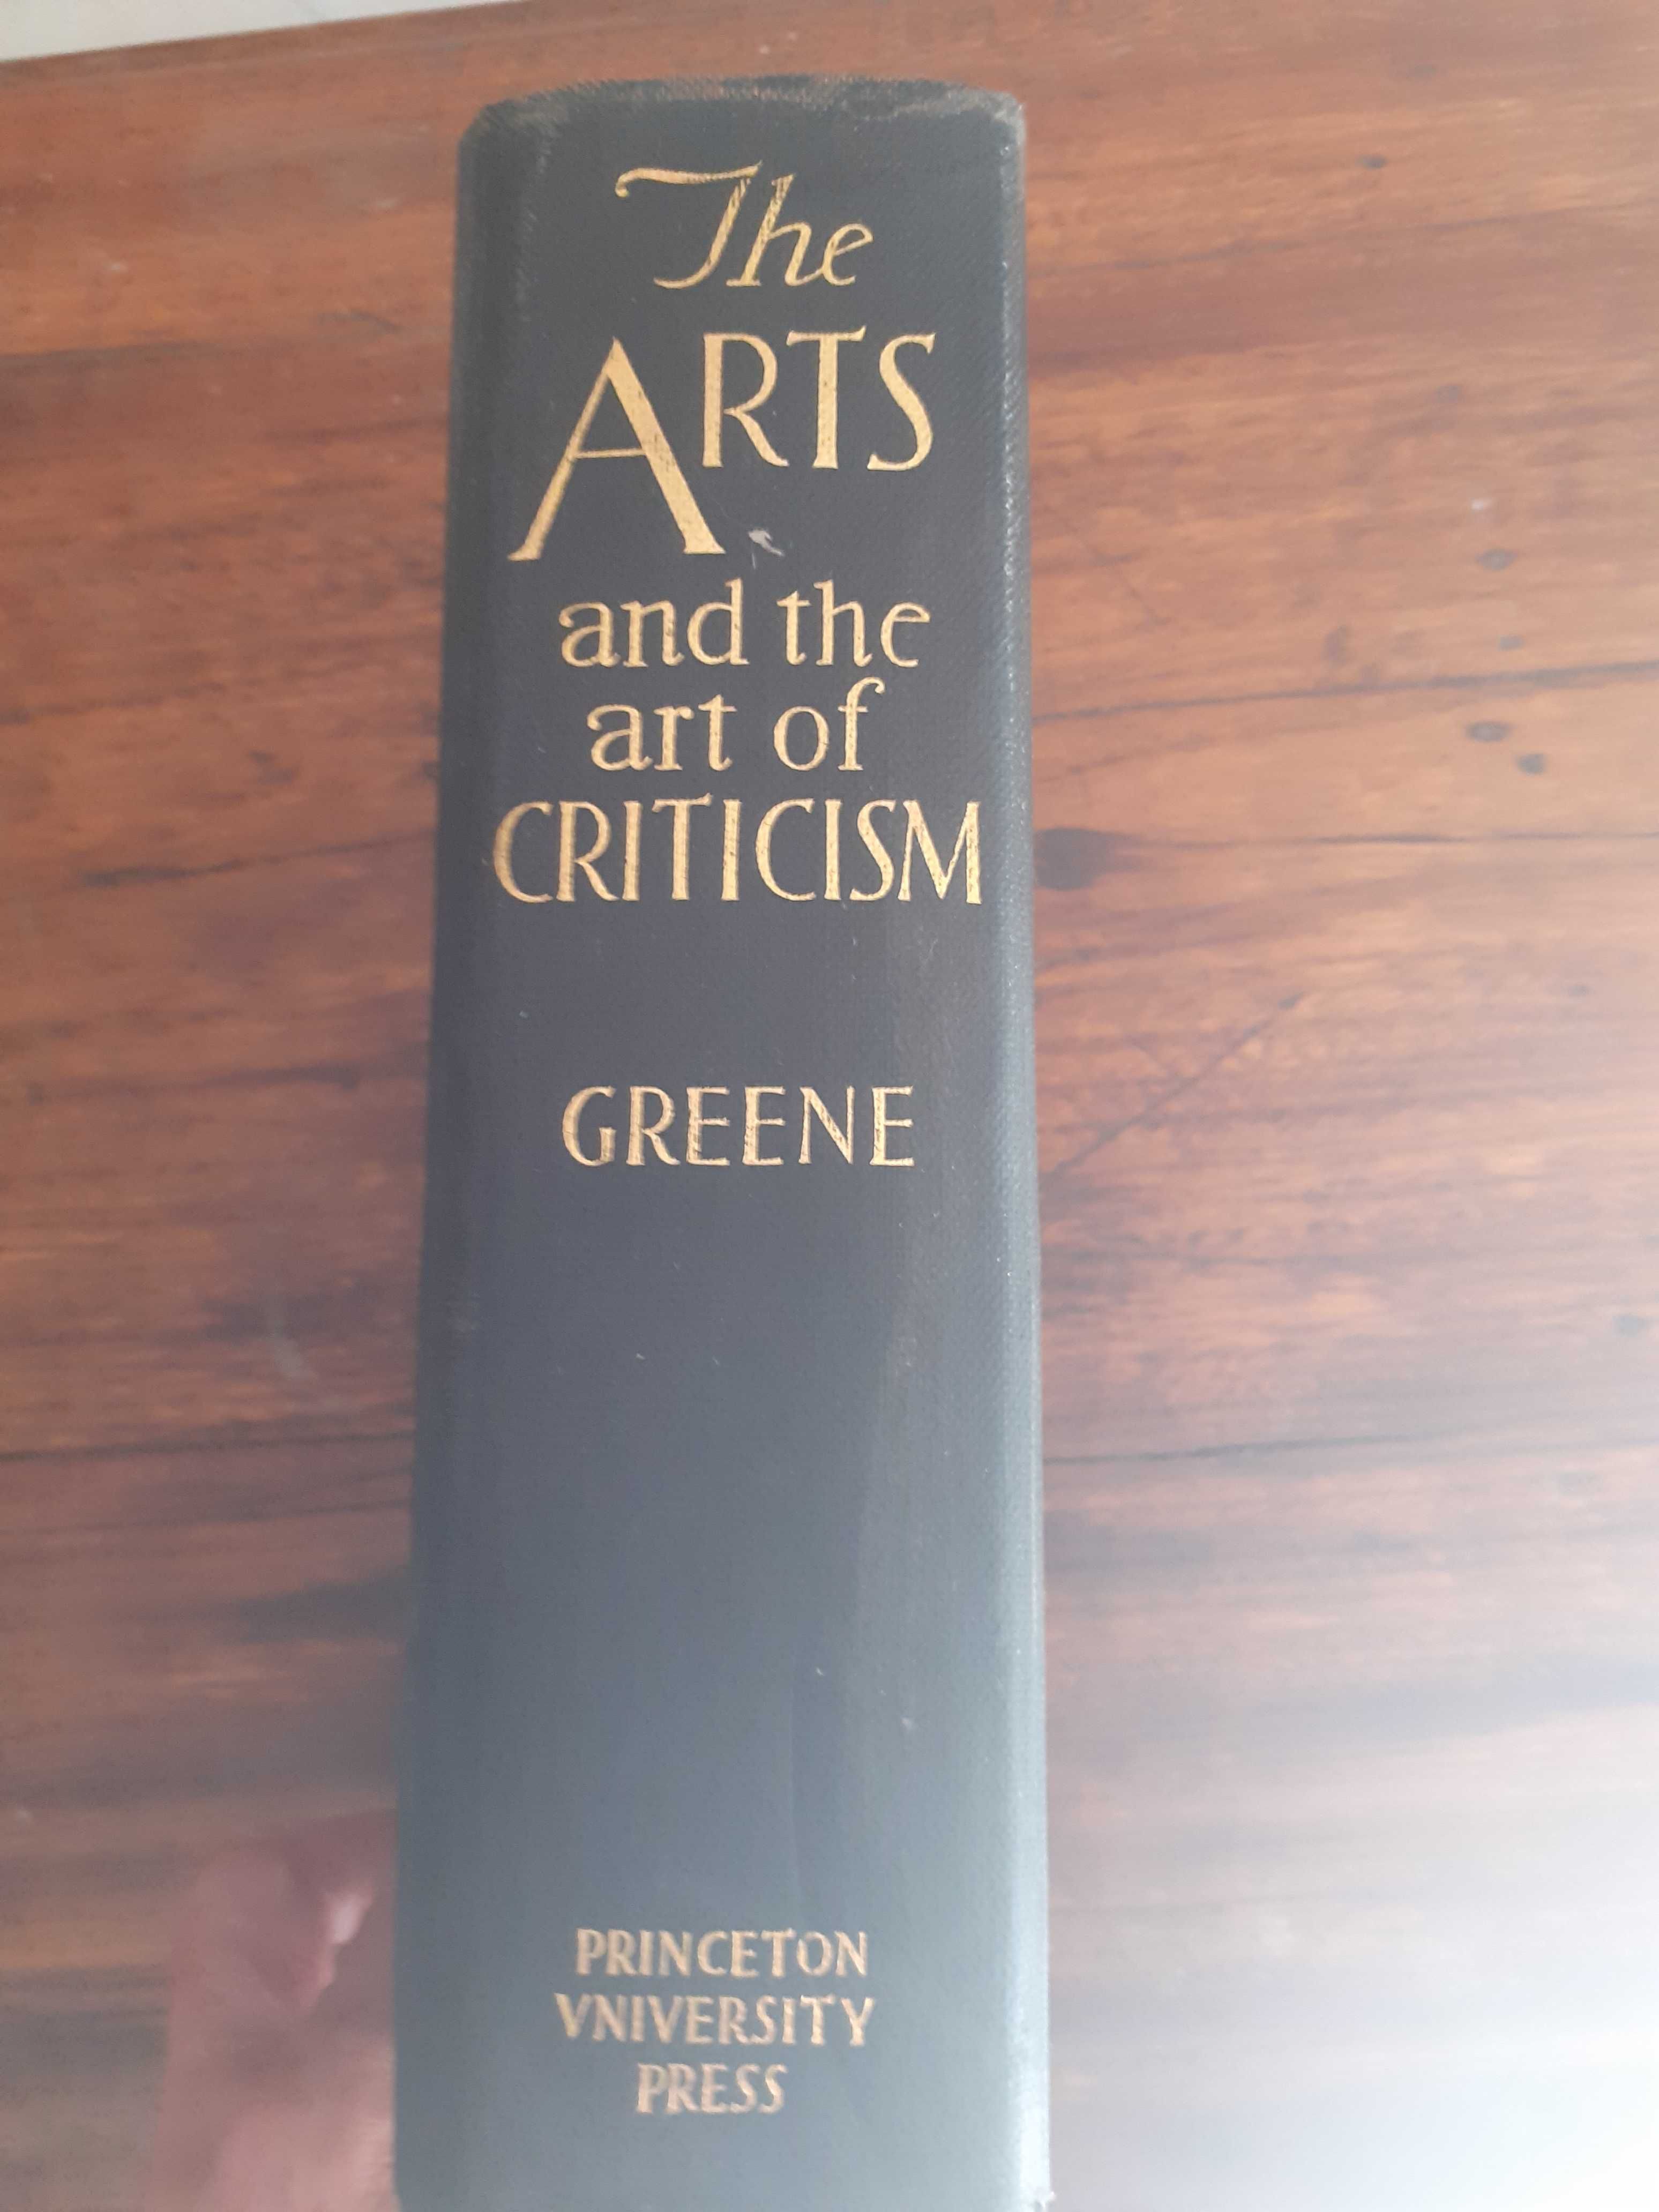 The Arts and the art of criticism